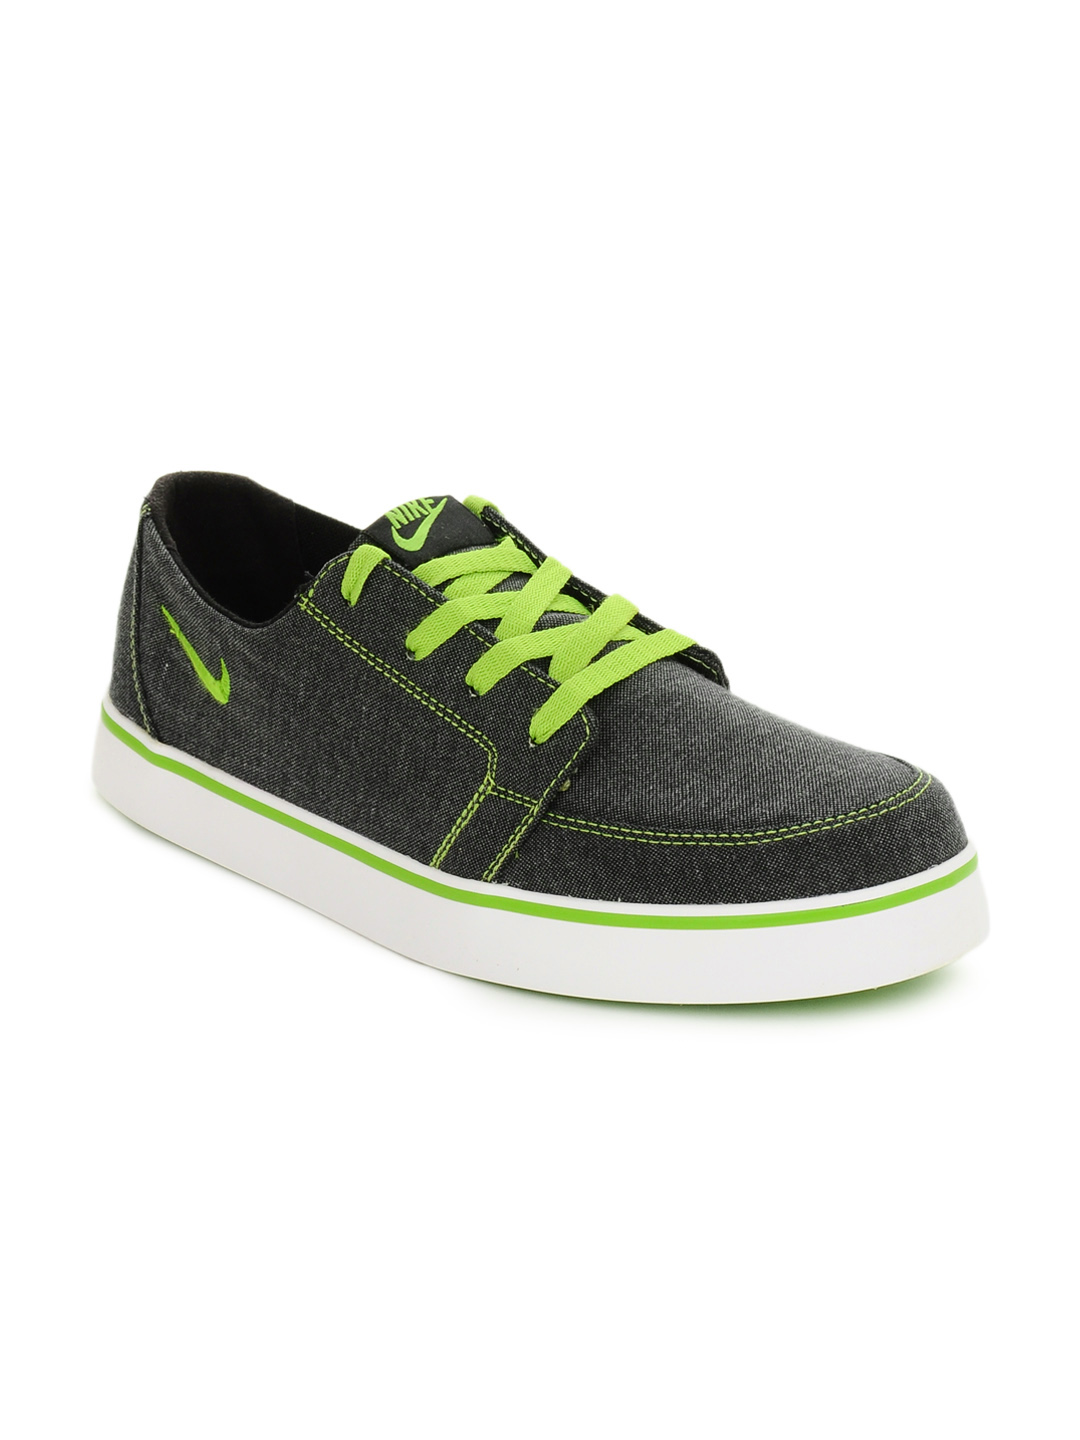  - Nike-Men-Grey-Dewired-Casual-Shoes_c1b211ad45c93e222085c89a4857cf6a_images_1080_1440_mini